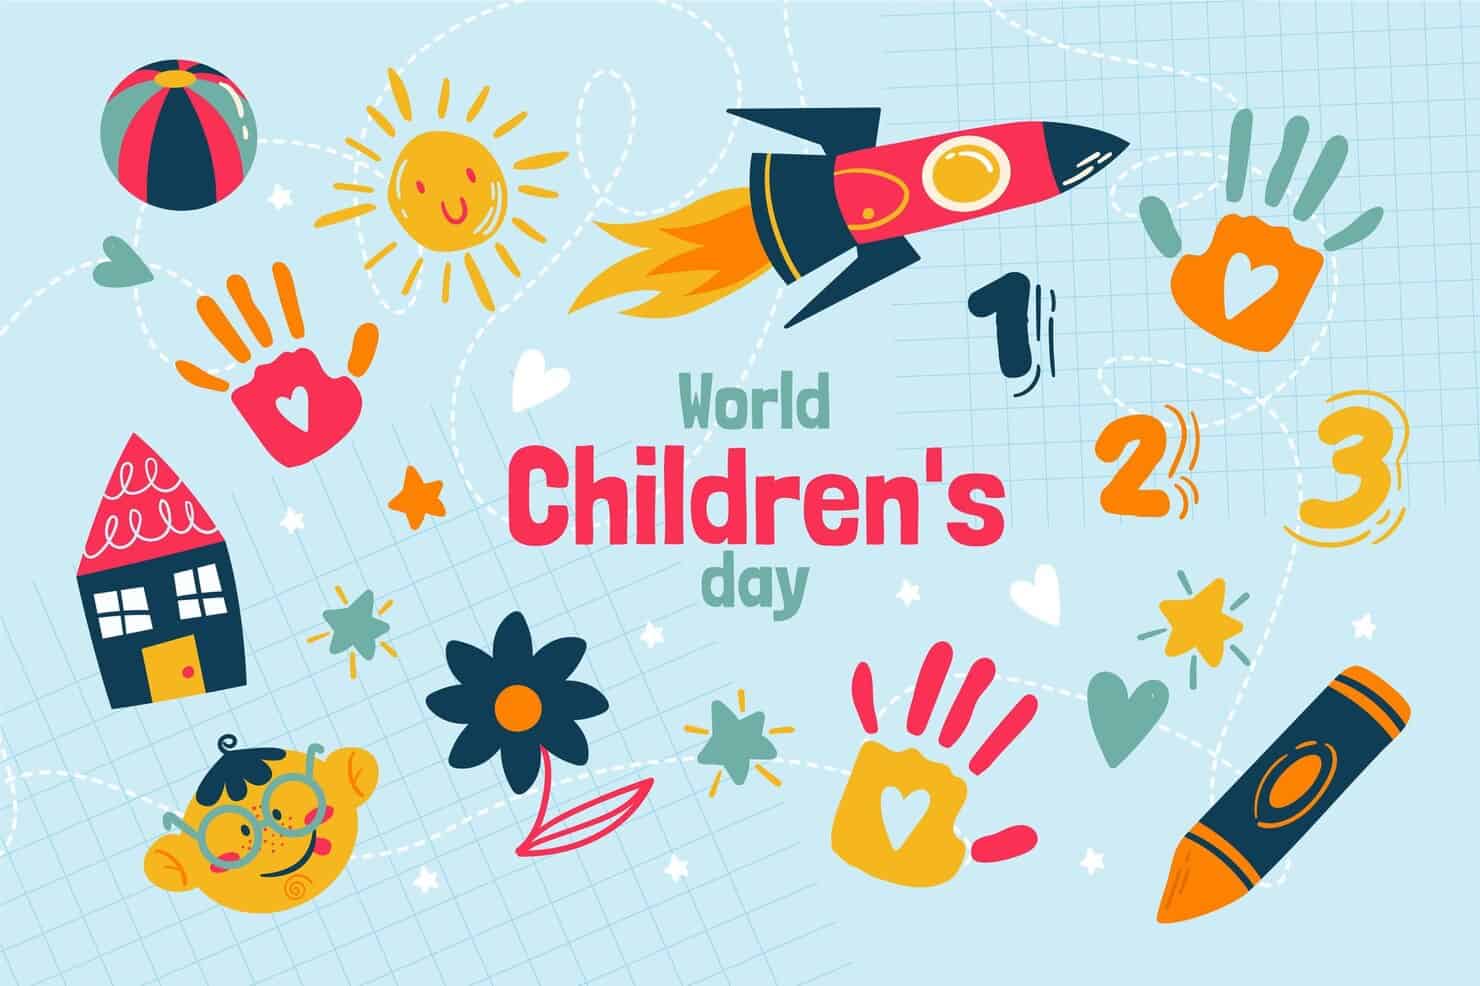 Children's Day Images